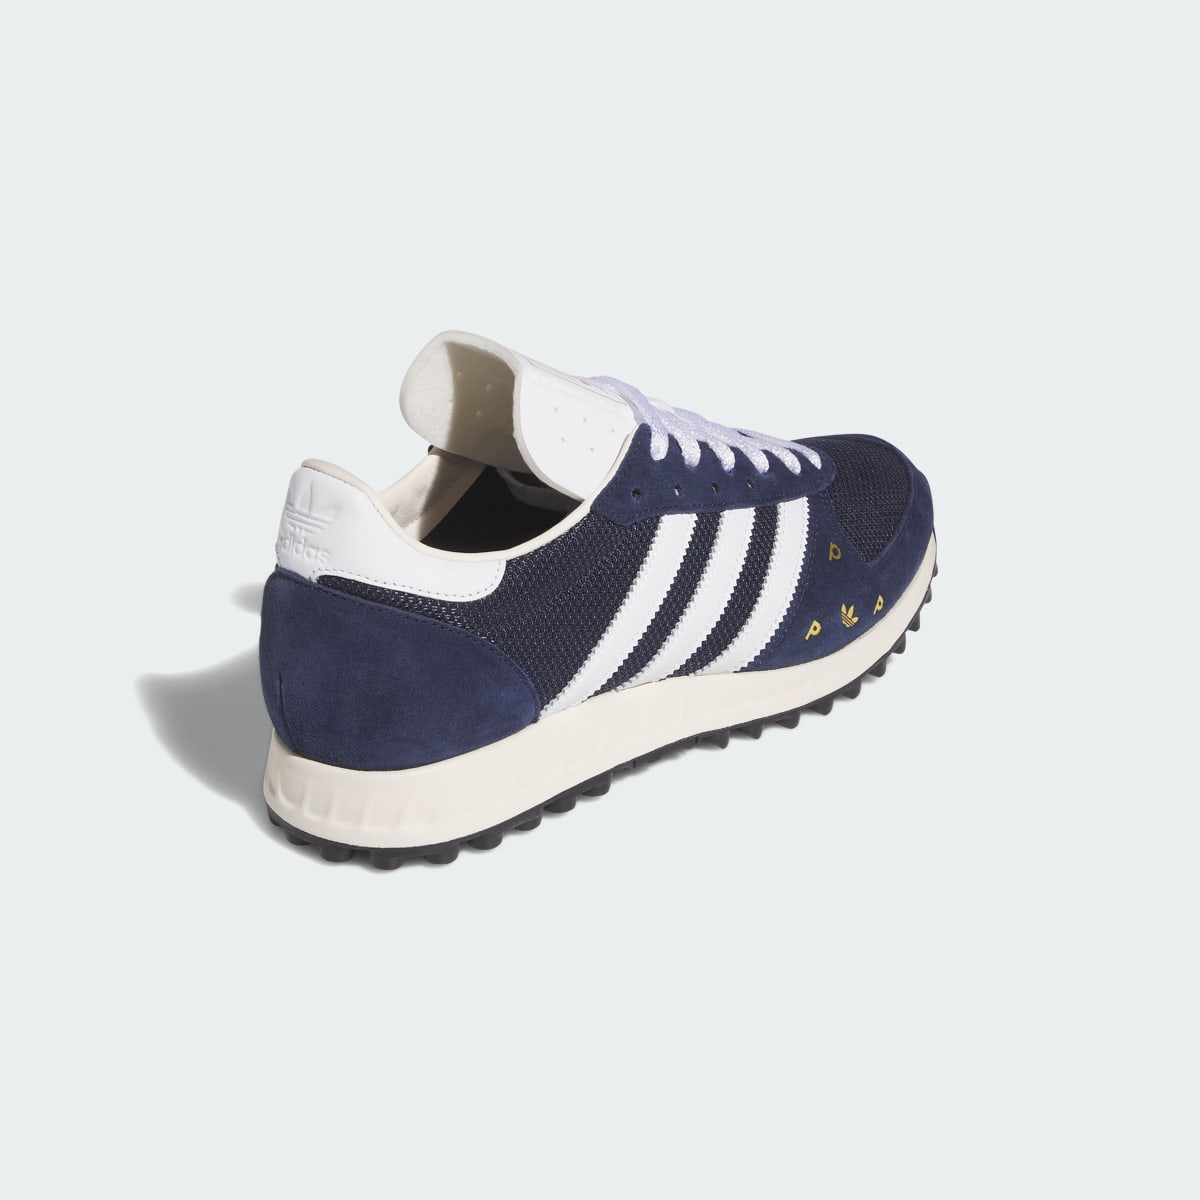 Adidas Pop Trading Co TRX Trainers. 7